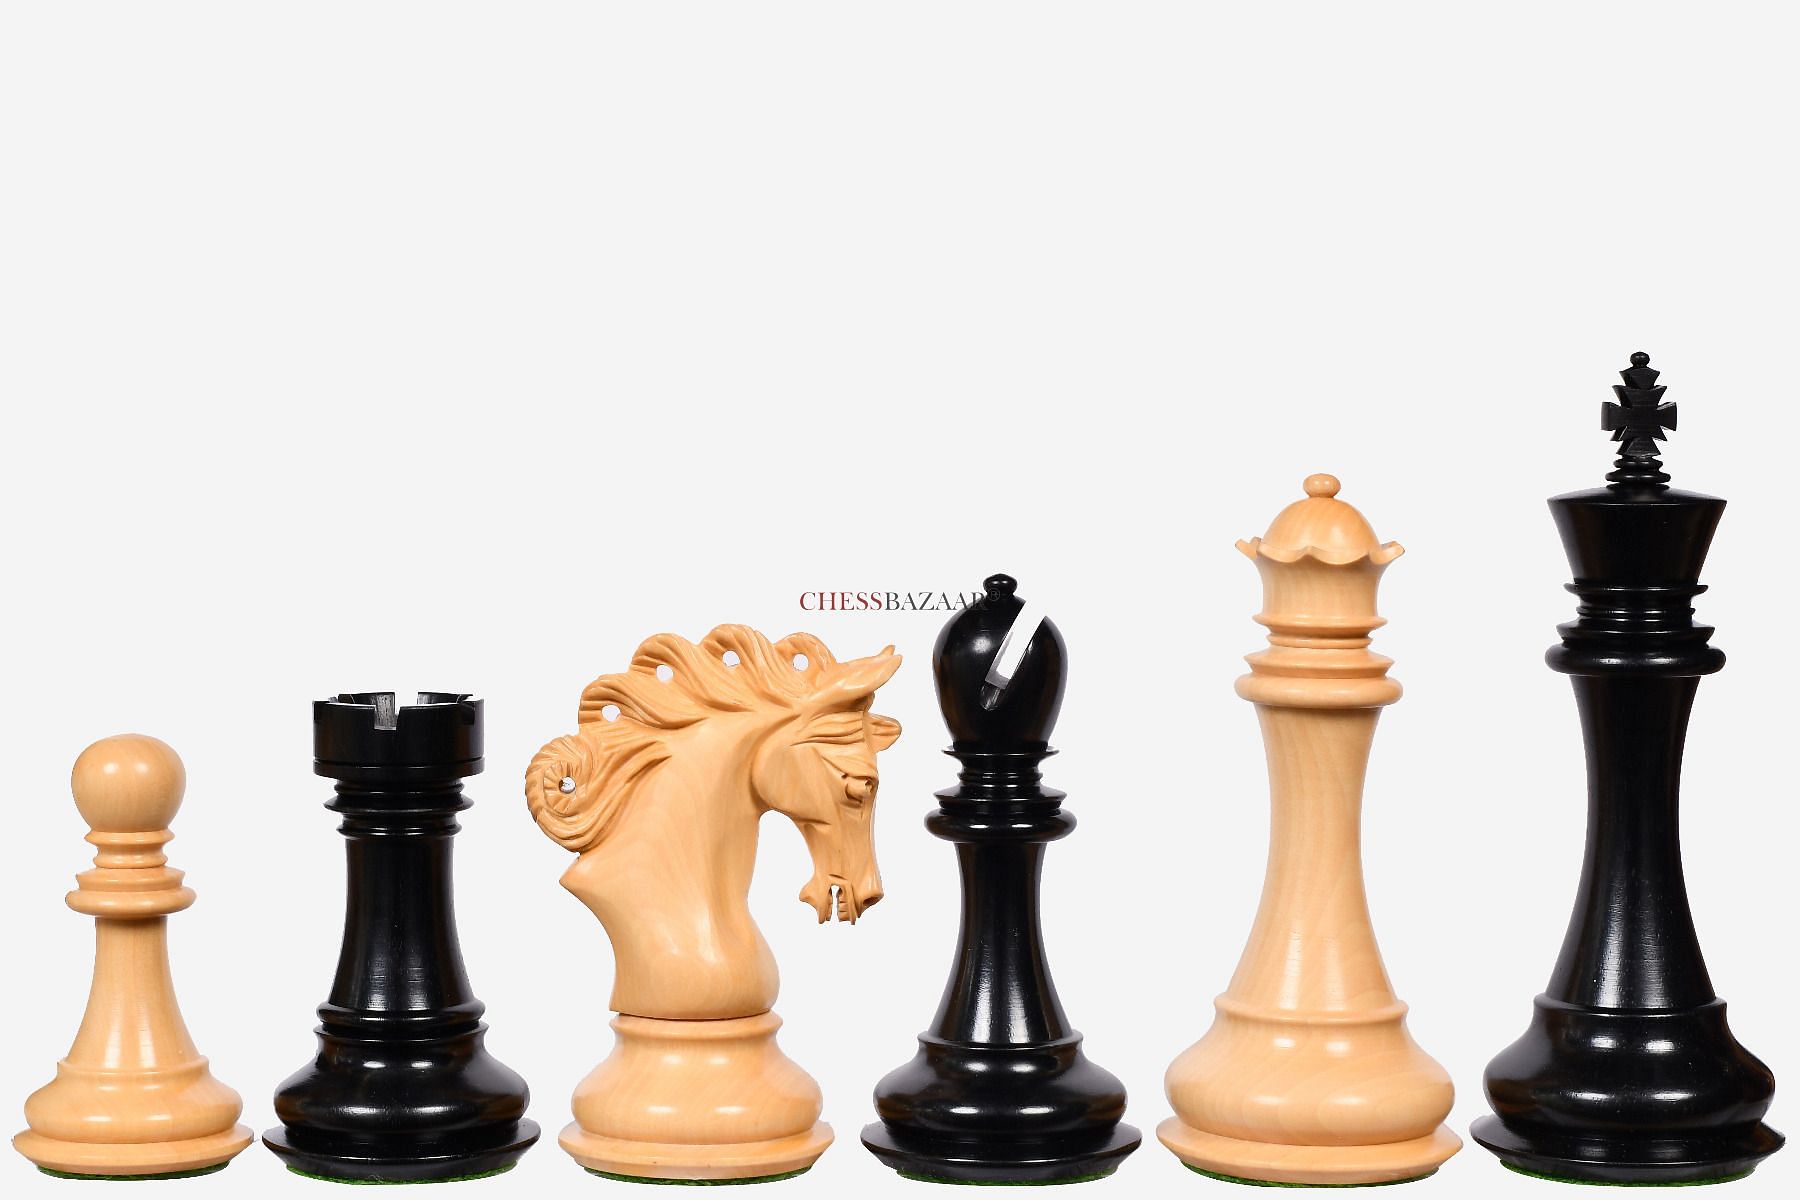 Buy Pegasus Staunton Chess Set ver 2.0 in Ebony and Wooden Chess